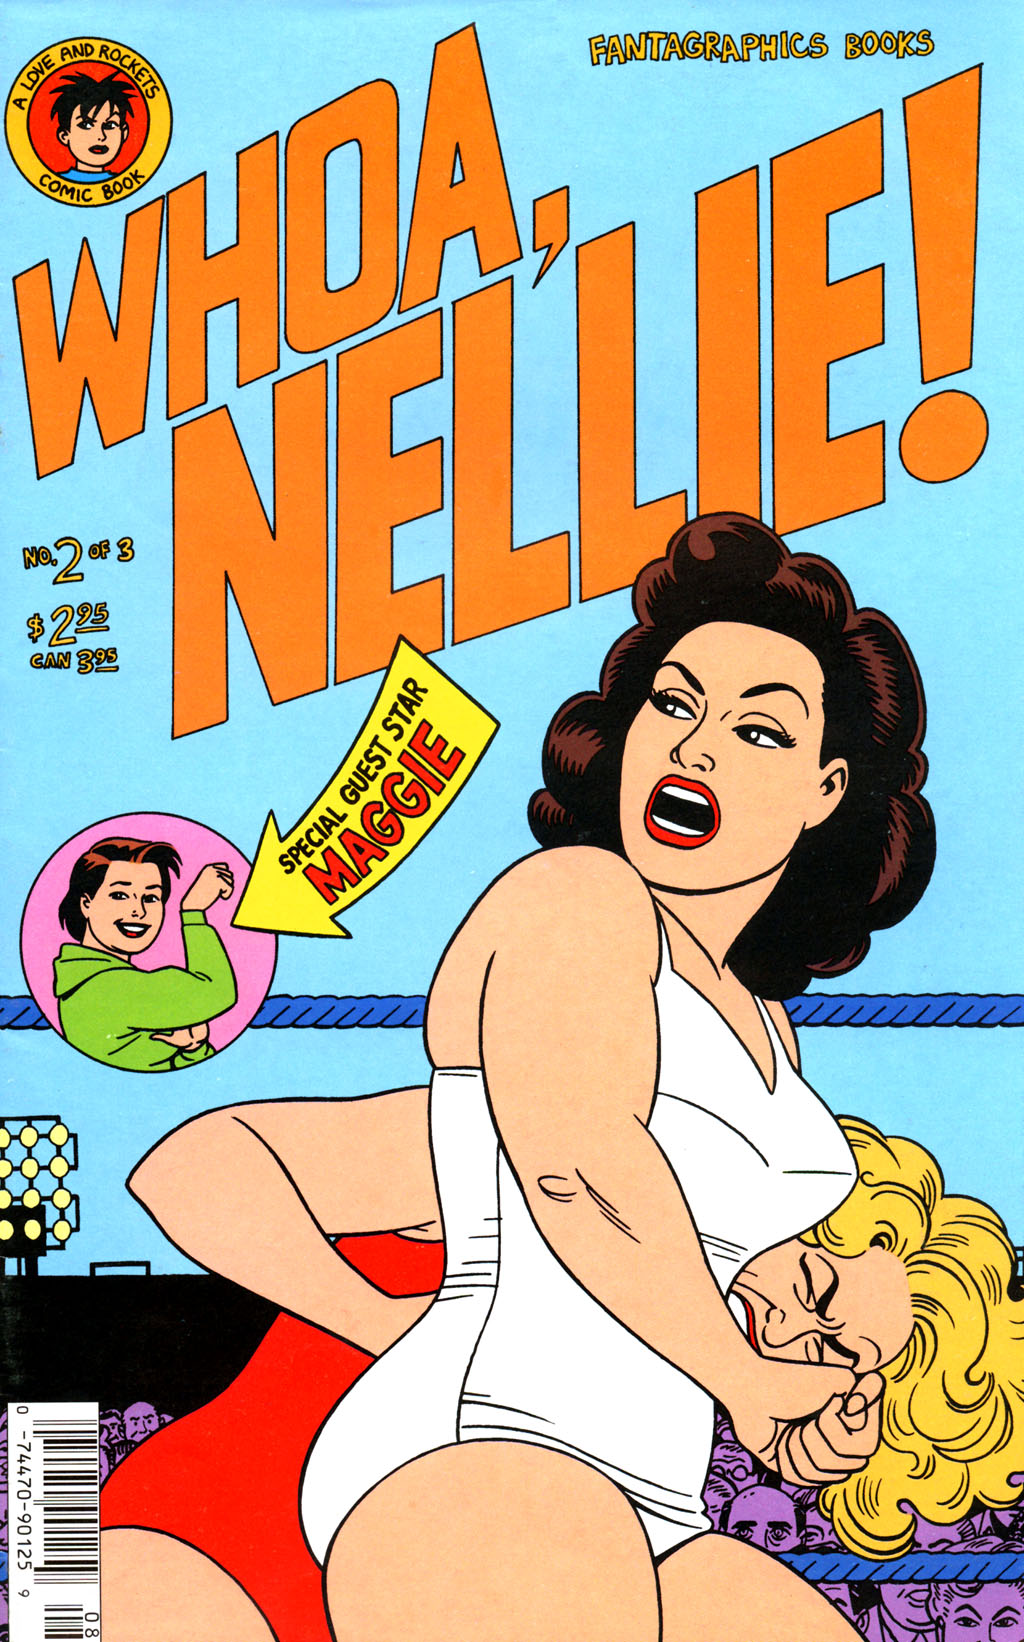 Read online Whoa, Nellie! comic -  Issue #2 - 2